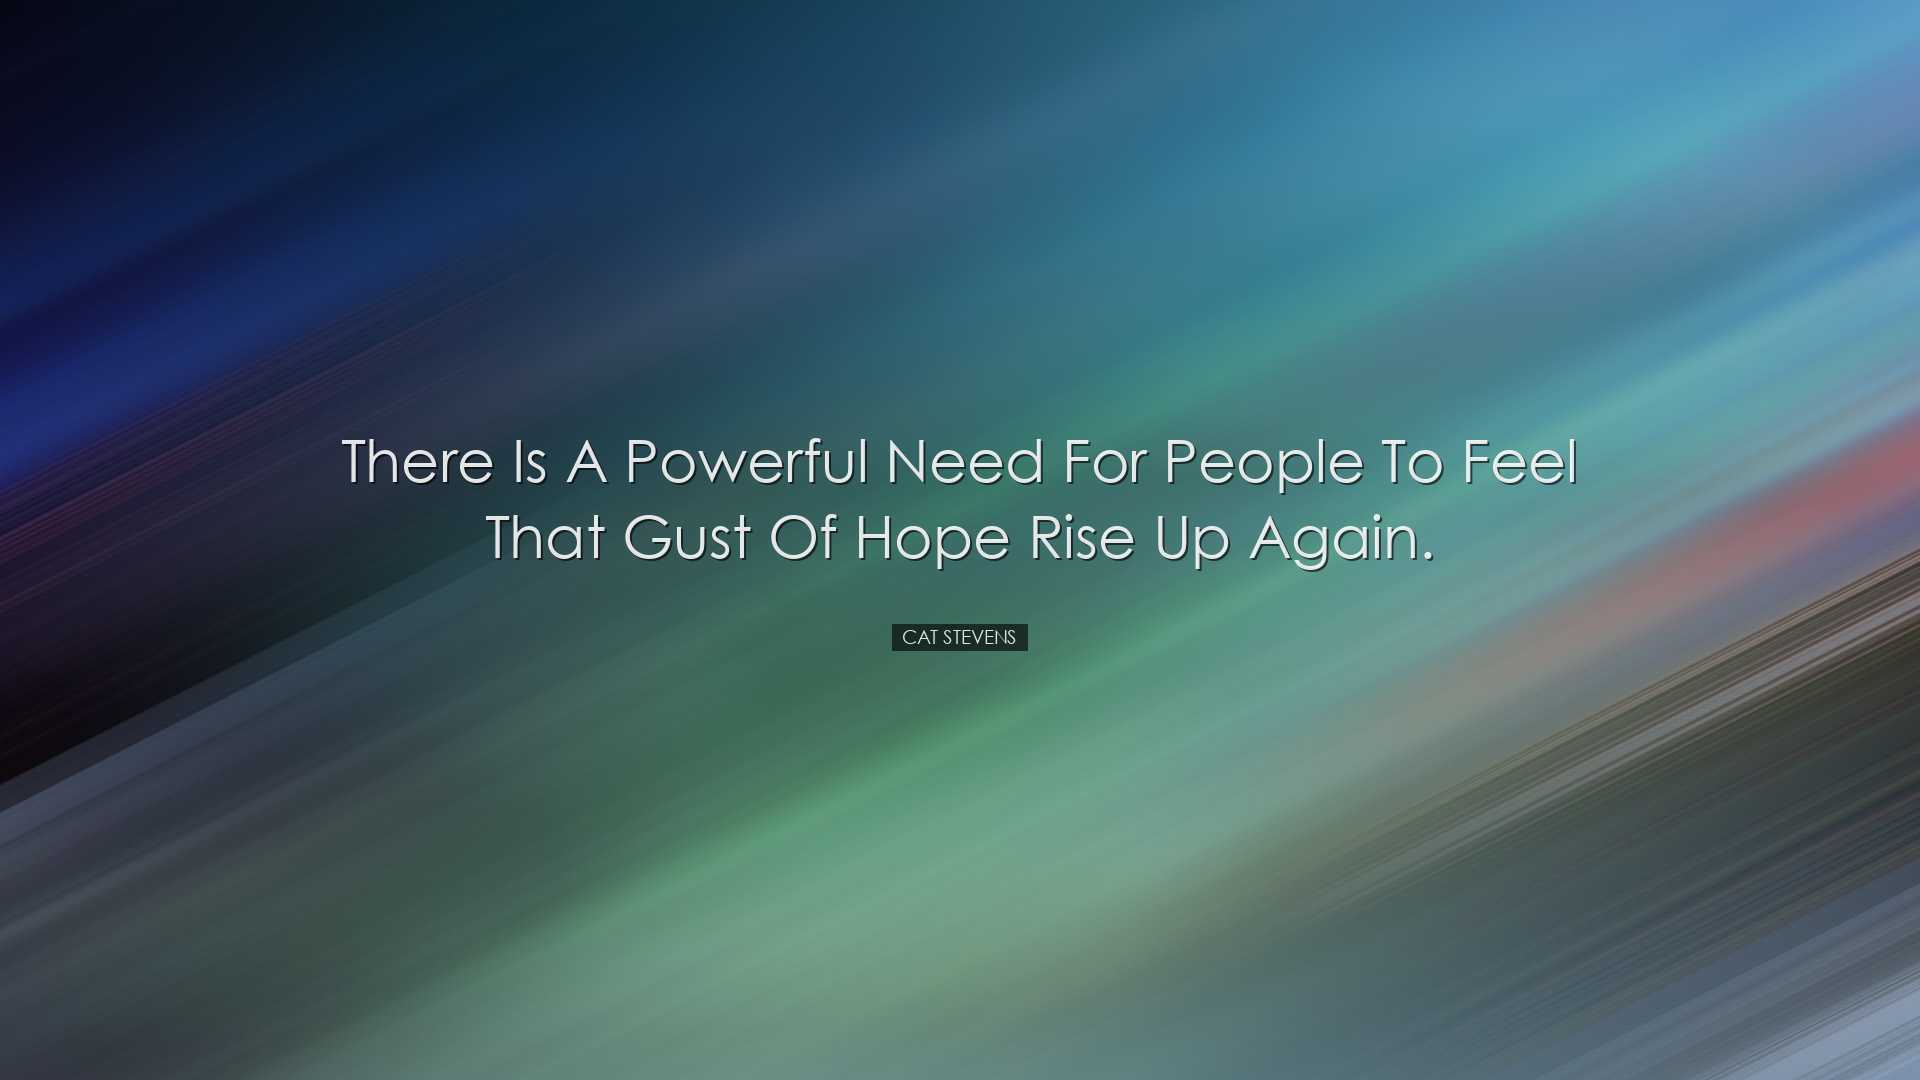 There is a powerful need for people to feel that gust of hope rise